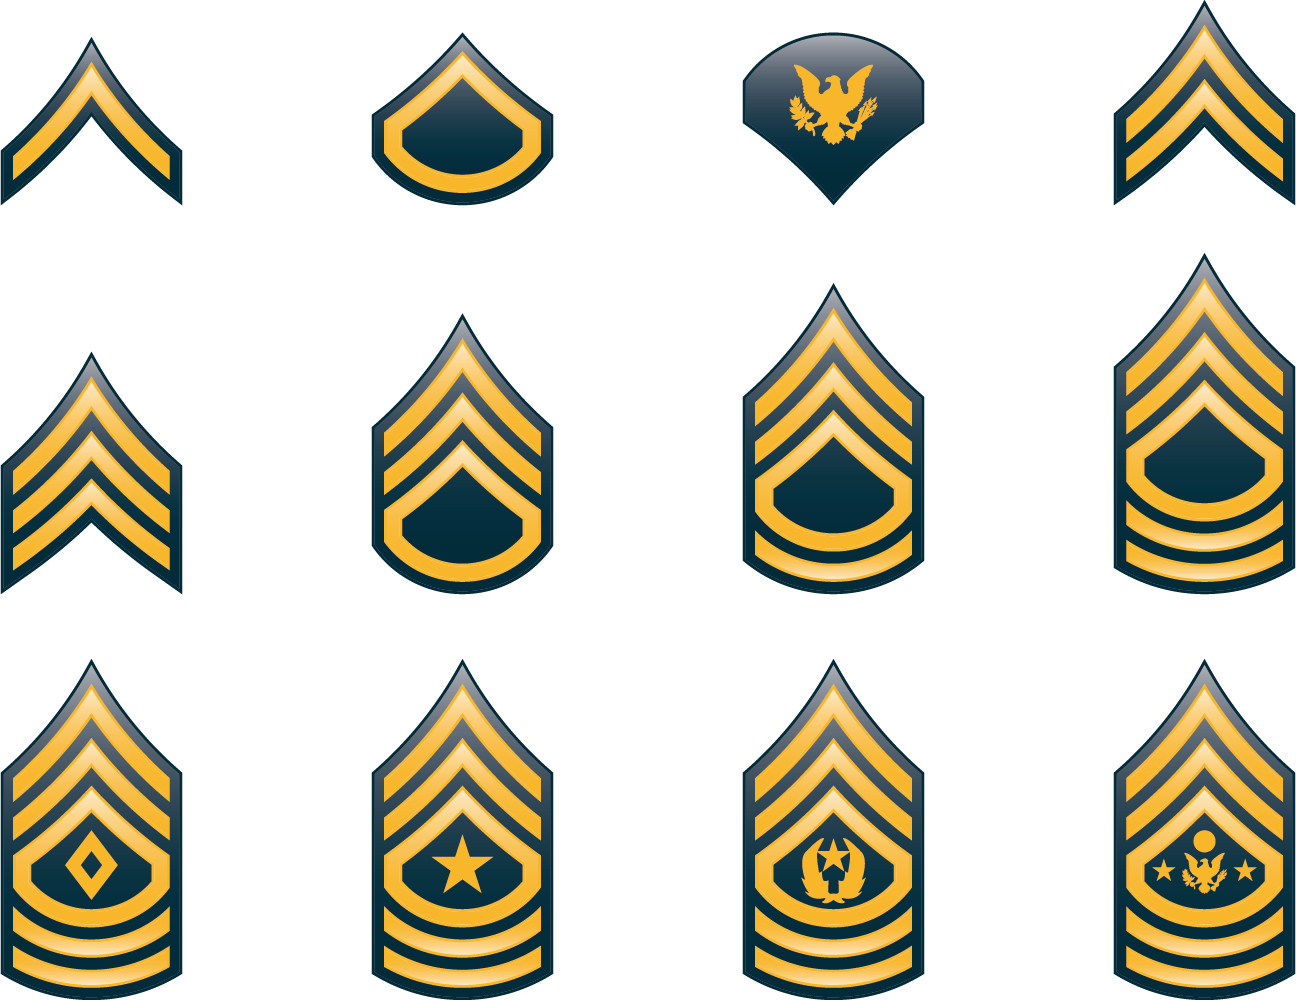 Military Rank United States Army Enlisted Rank Insignia - Military Rank Cli...